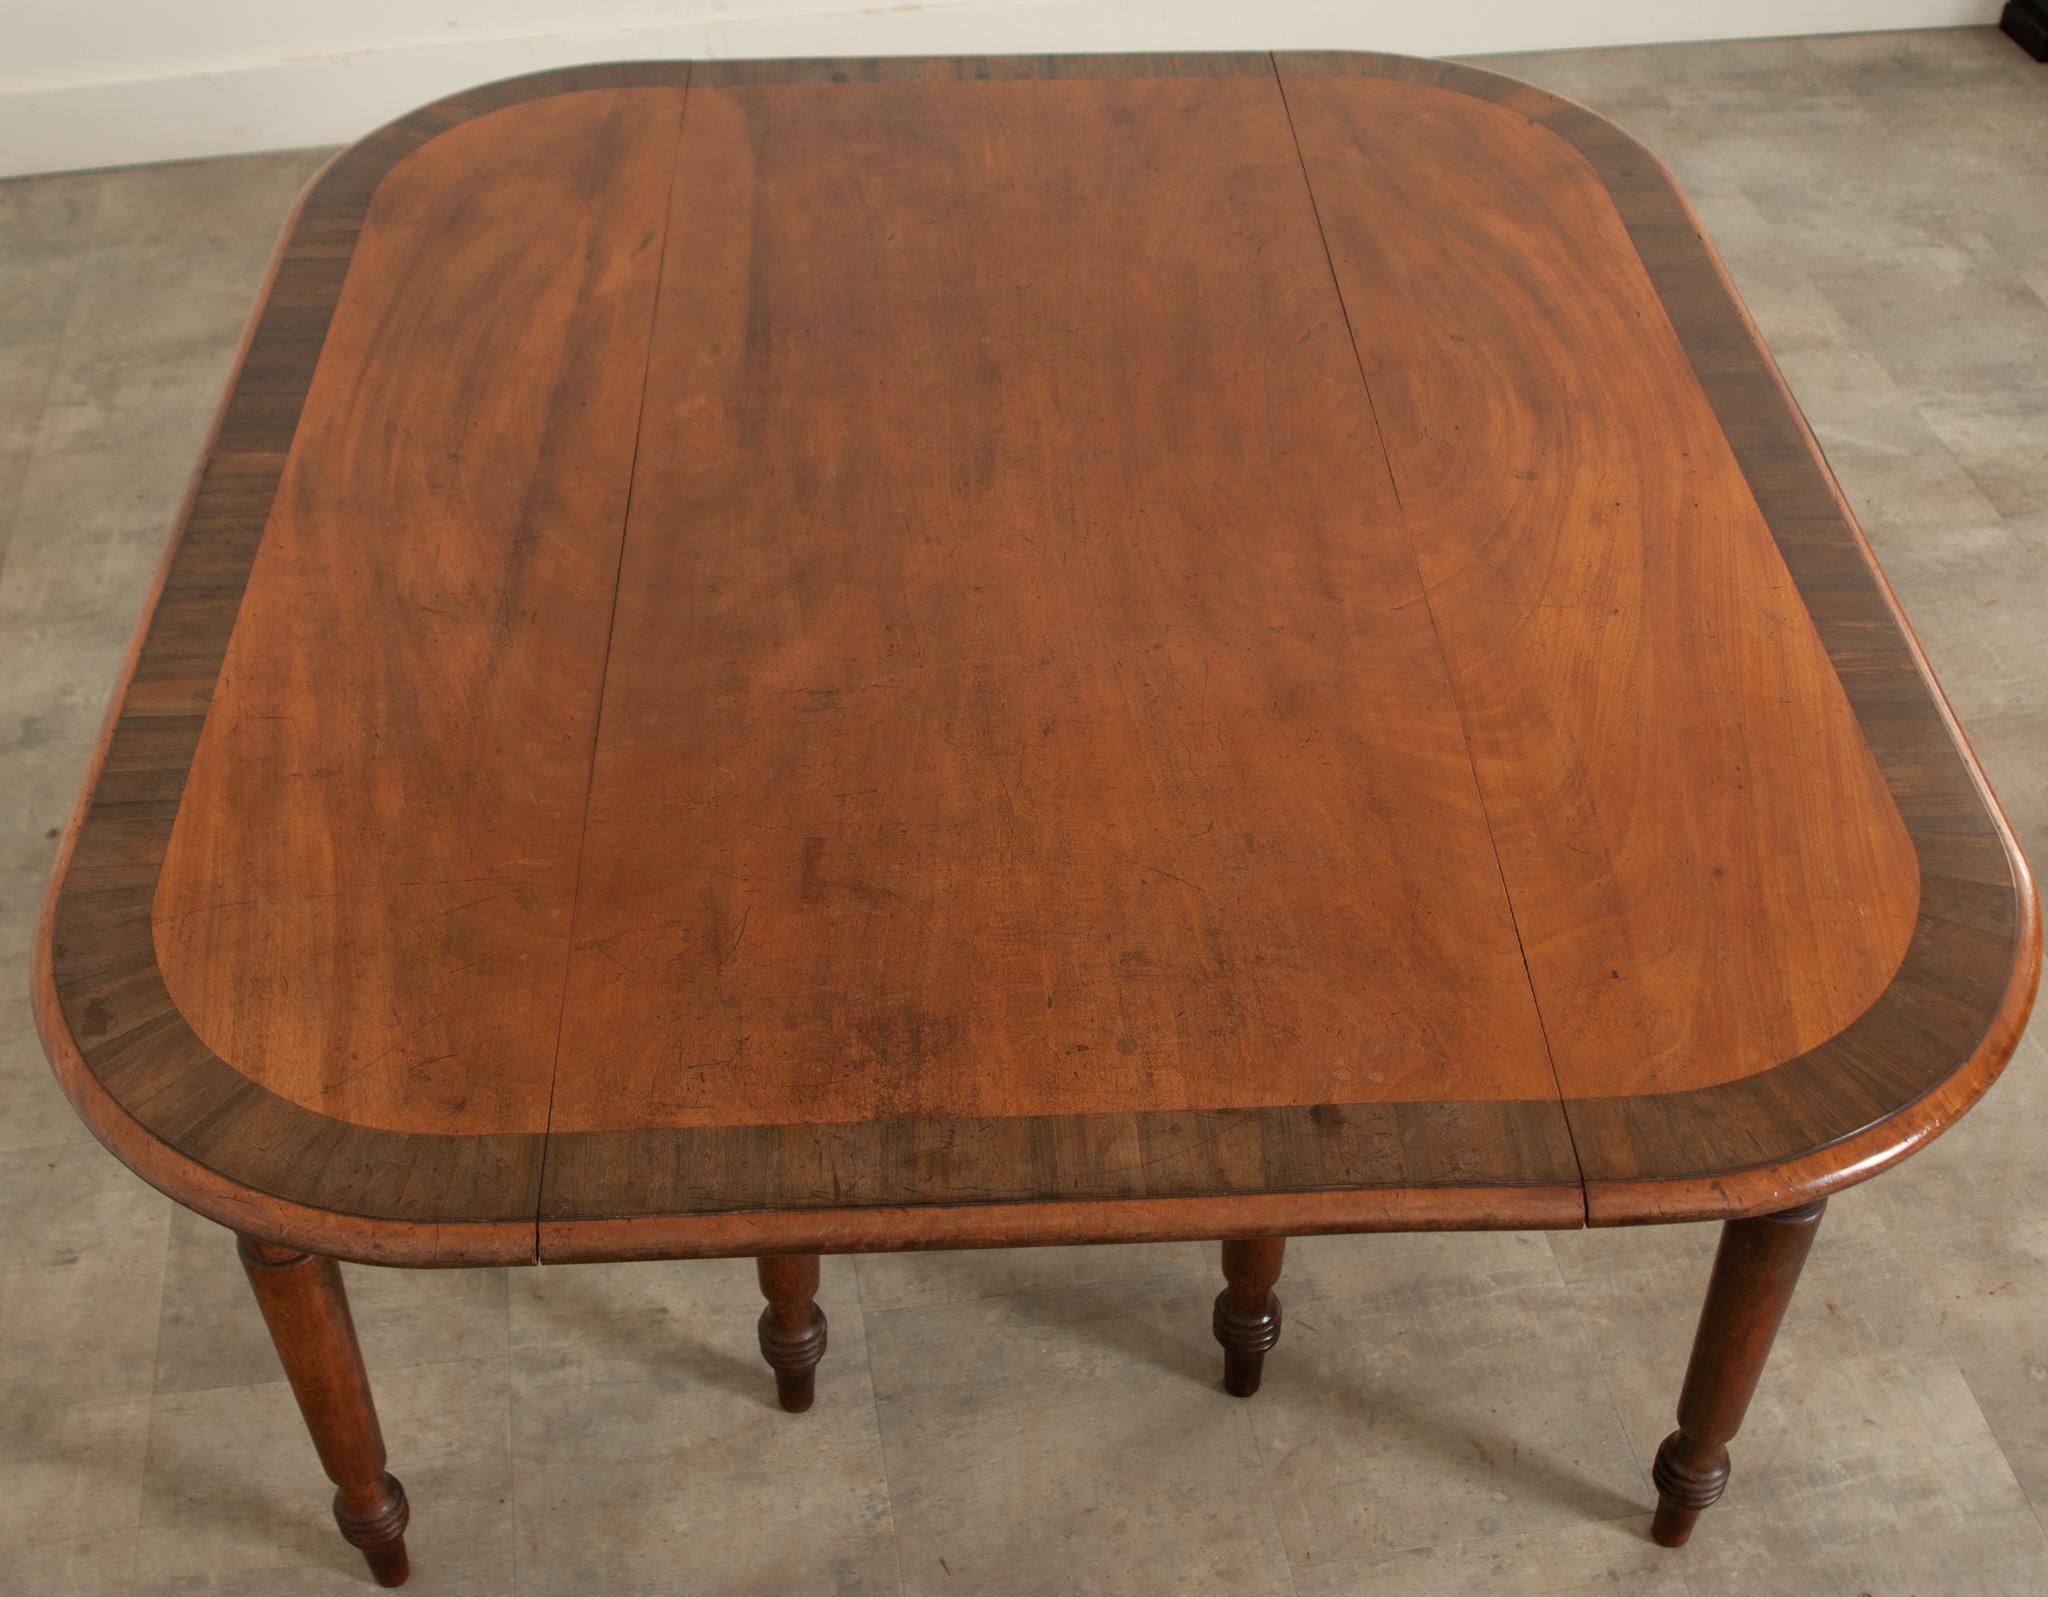 English 19th Century Mahogany Gateleg Drop-leaf Table In Good Condition For Sale In Baton Rouge, LA